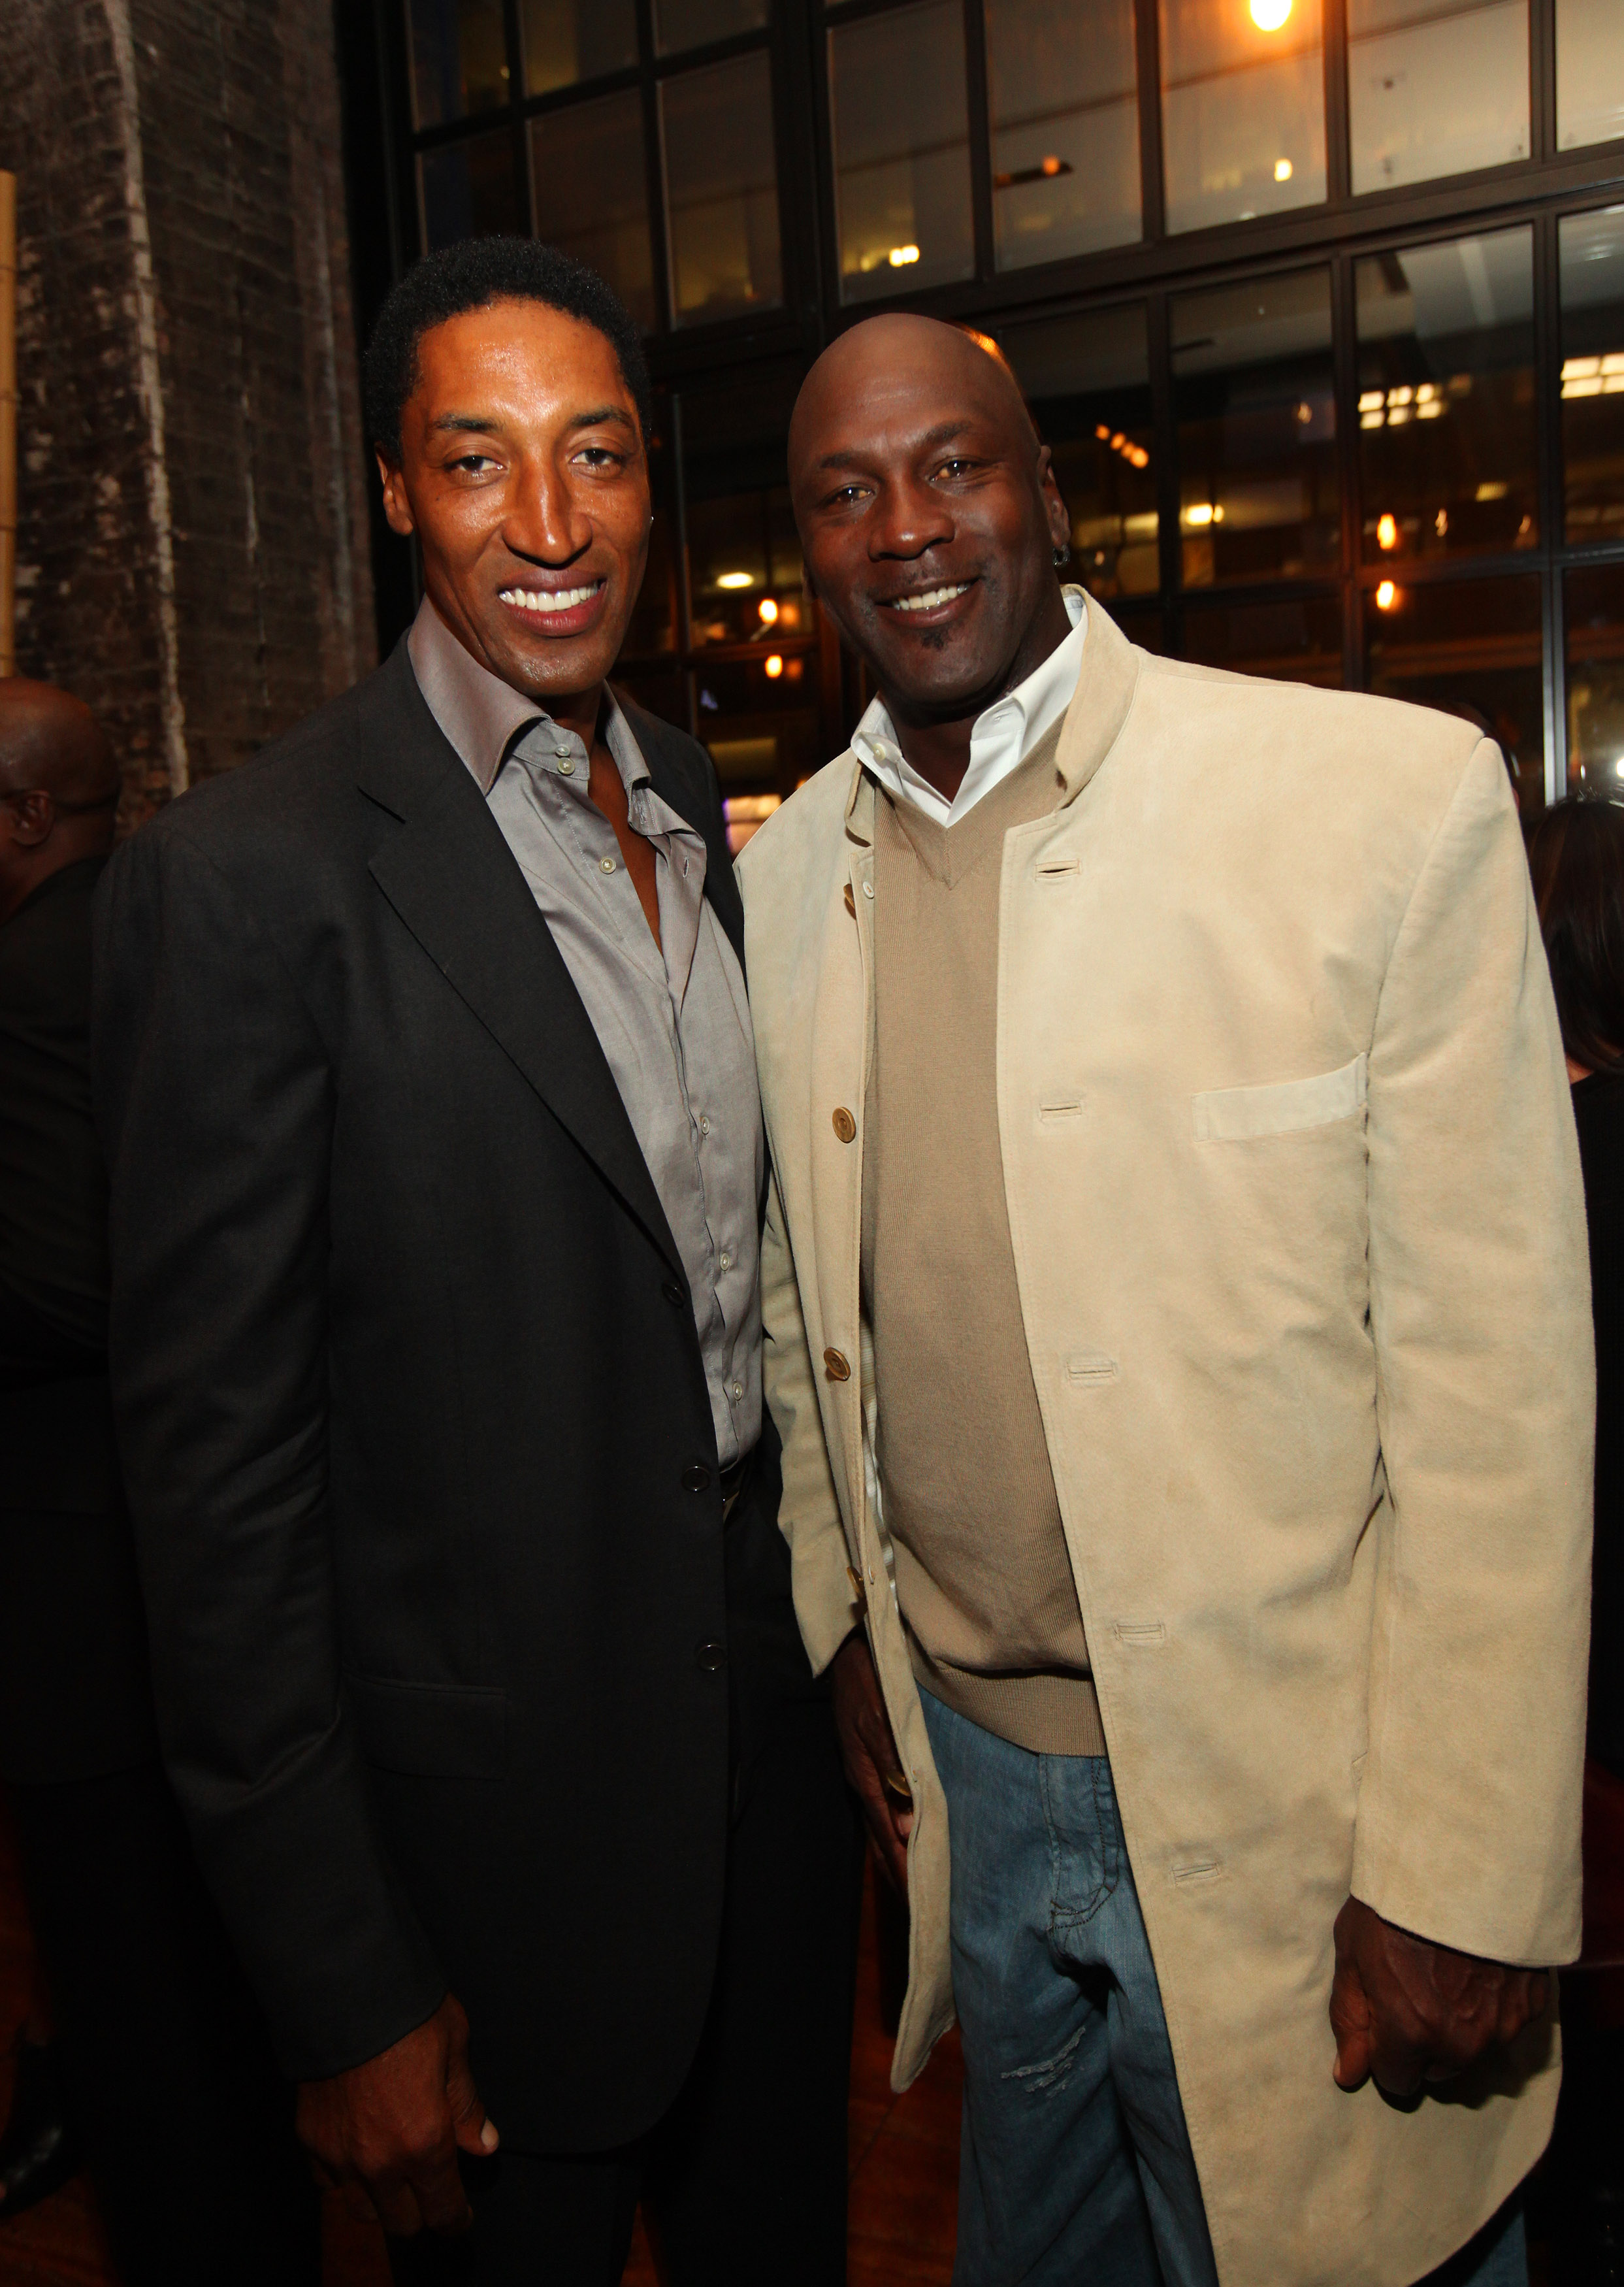 Michael Jordan and Scottie Pippen in Chicago in 2012. | Source: Getty Images